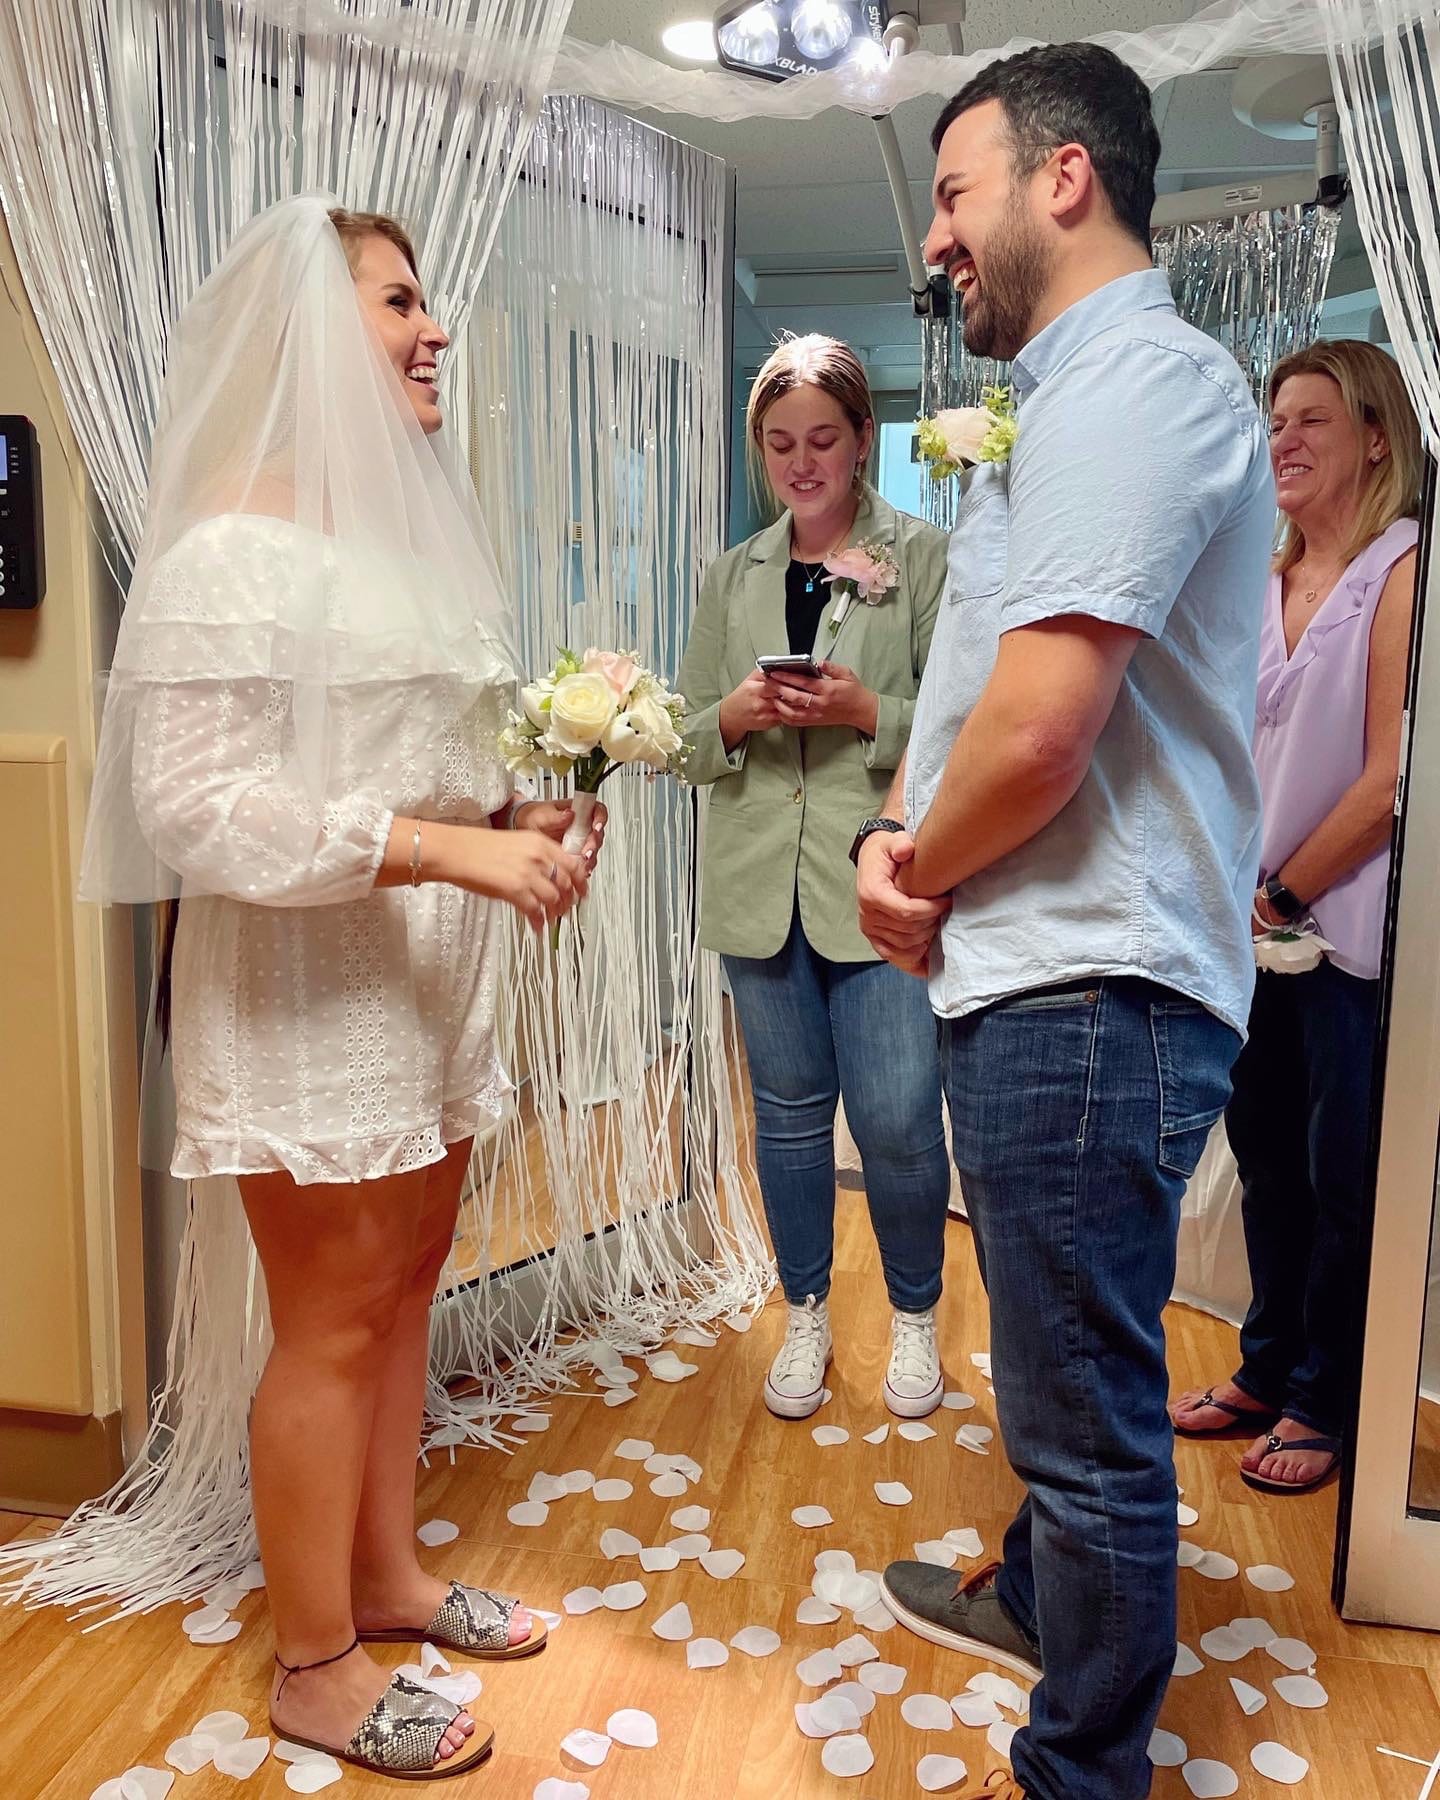 bride and groom during their ceremony at their hospital room wedding.